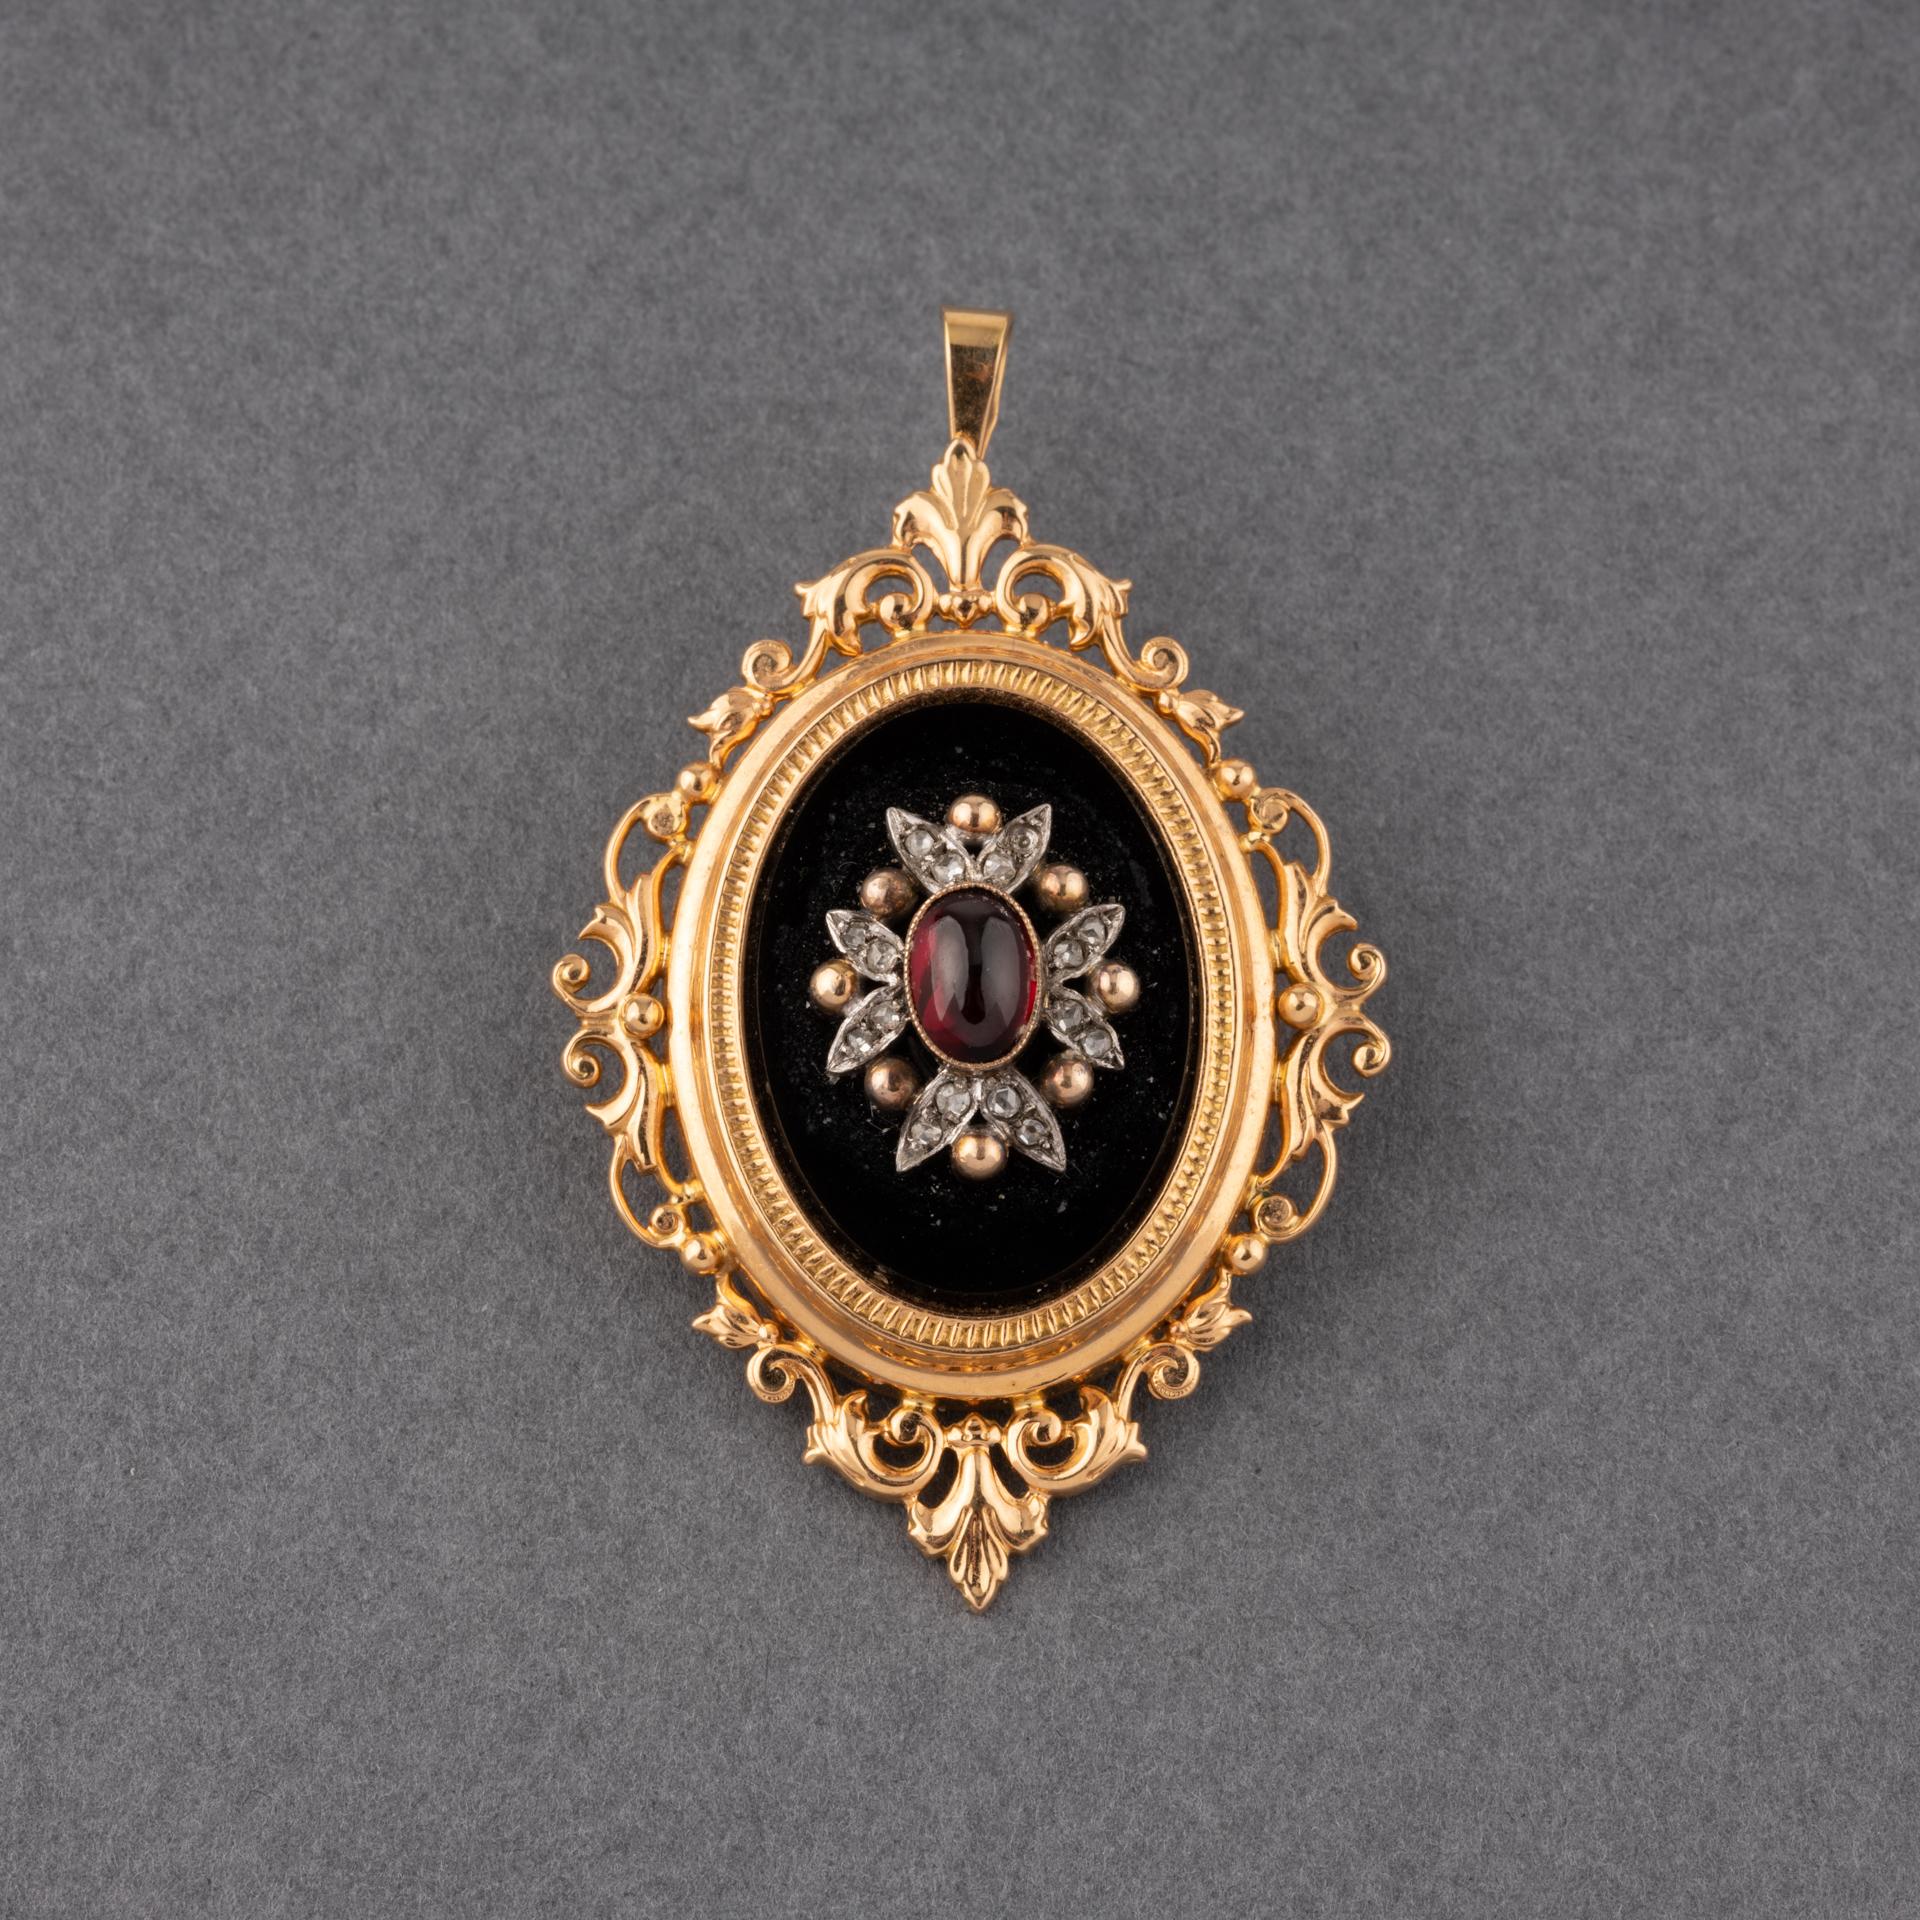 A lovely antique pendant and brooch, made in France circa 1860.
Made in yellow gold 18k, set with Onyx, rose cut diamonds and a Garnet cabochon.
Hallmark for gold: the eagle head. Hallmark of maker.
Dimensions: 55 mm height and 35mm width.
Weight: